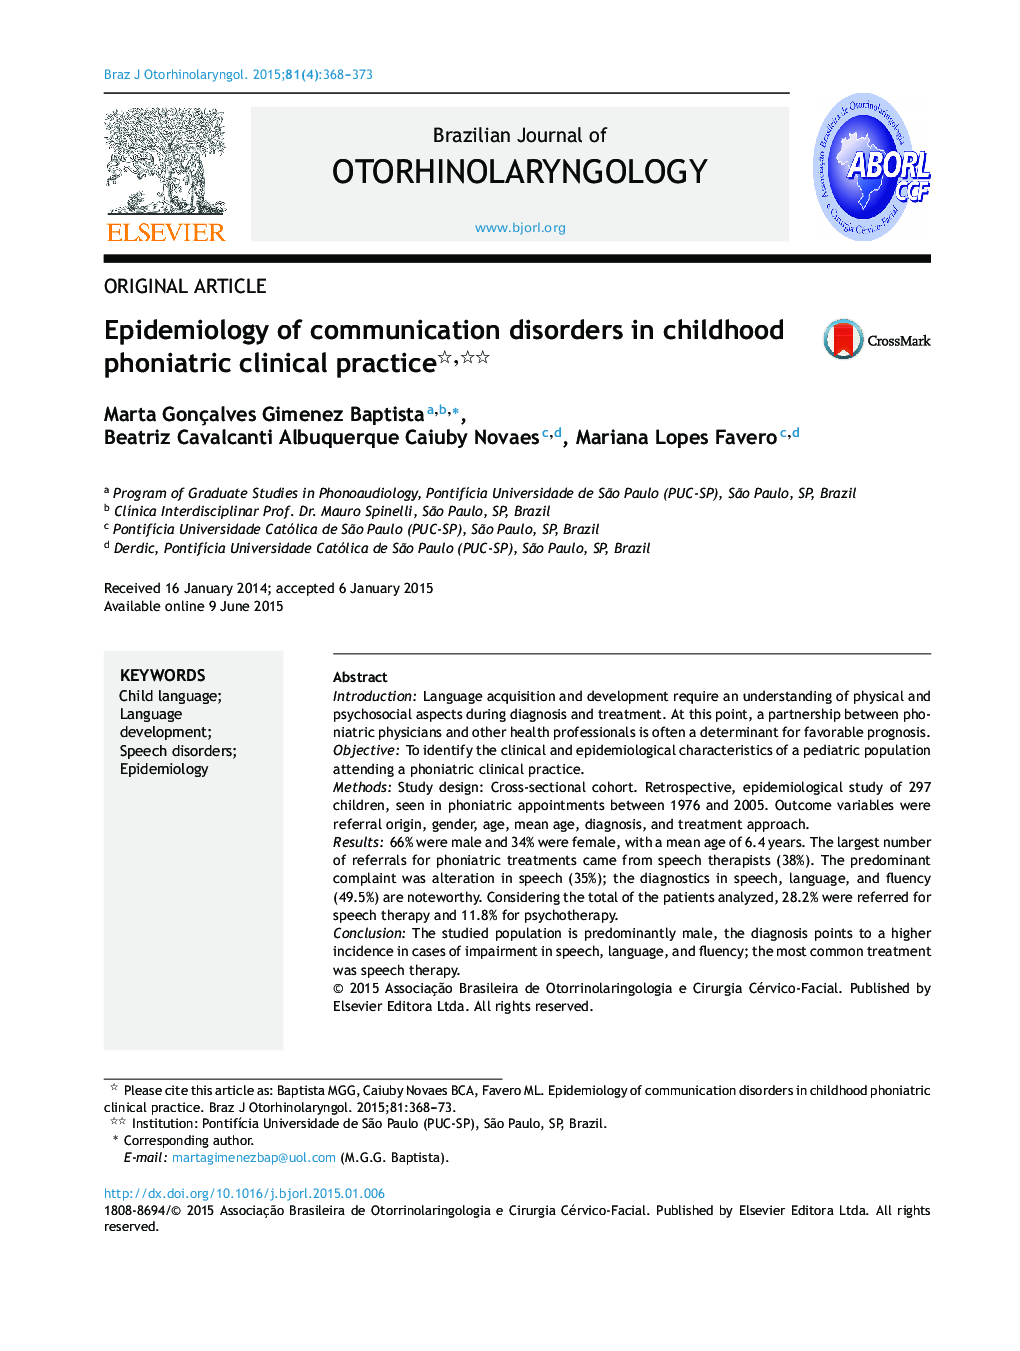 Epidemiology of communication disorders in childhood phoniatric clinical practice 